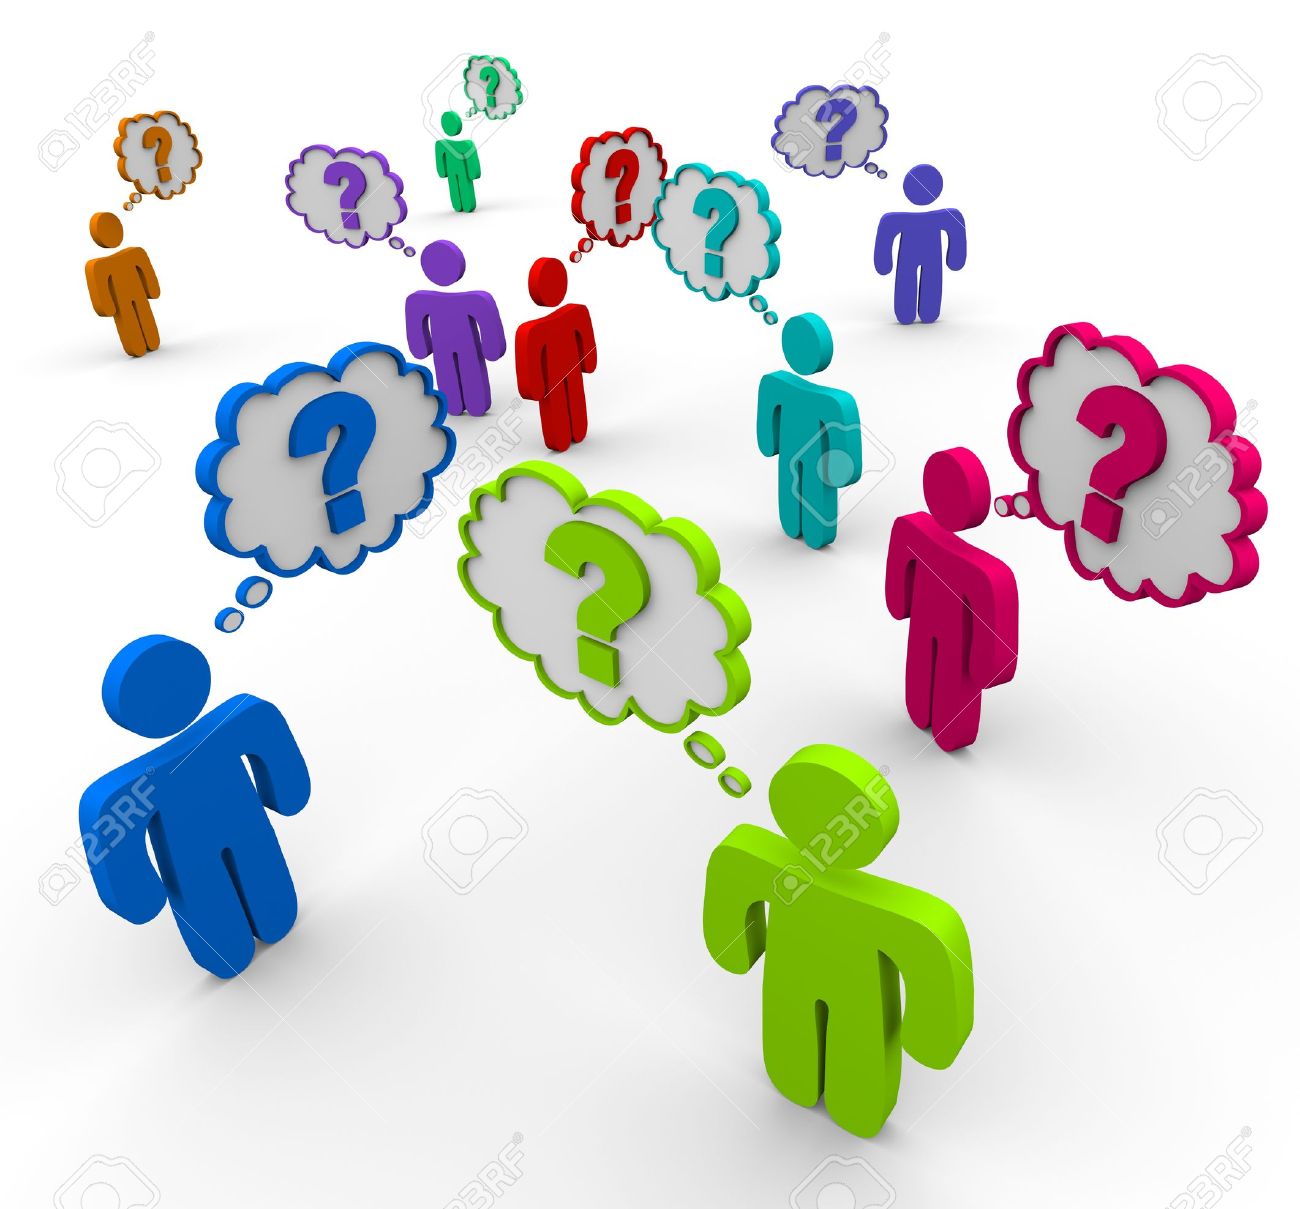 8491167-Many-colorful-people-stand-in-a-crowd-thinking-of-questions-Stock-Photo